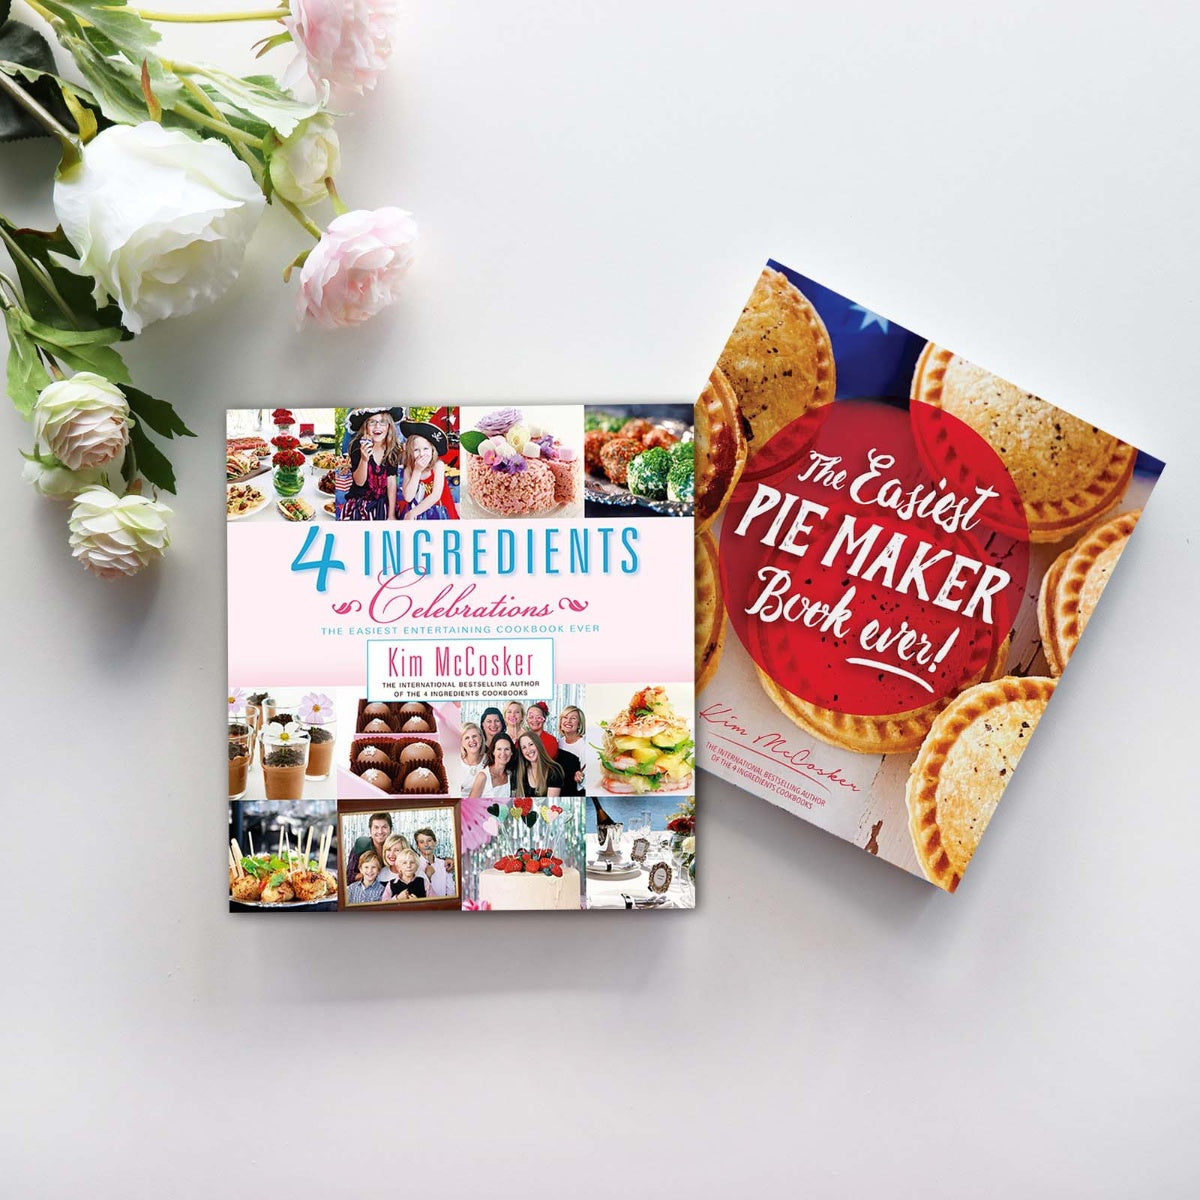 The Easiest Pie Maker Book ever + 4 Ingredients Celebrations